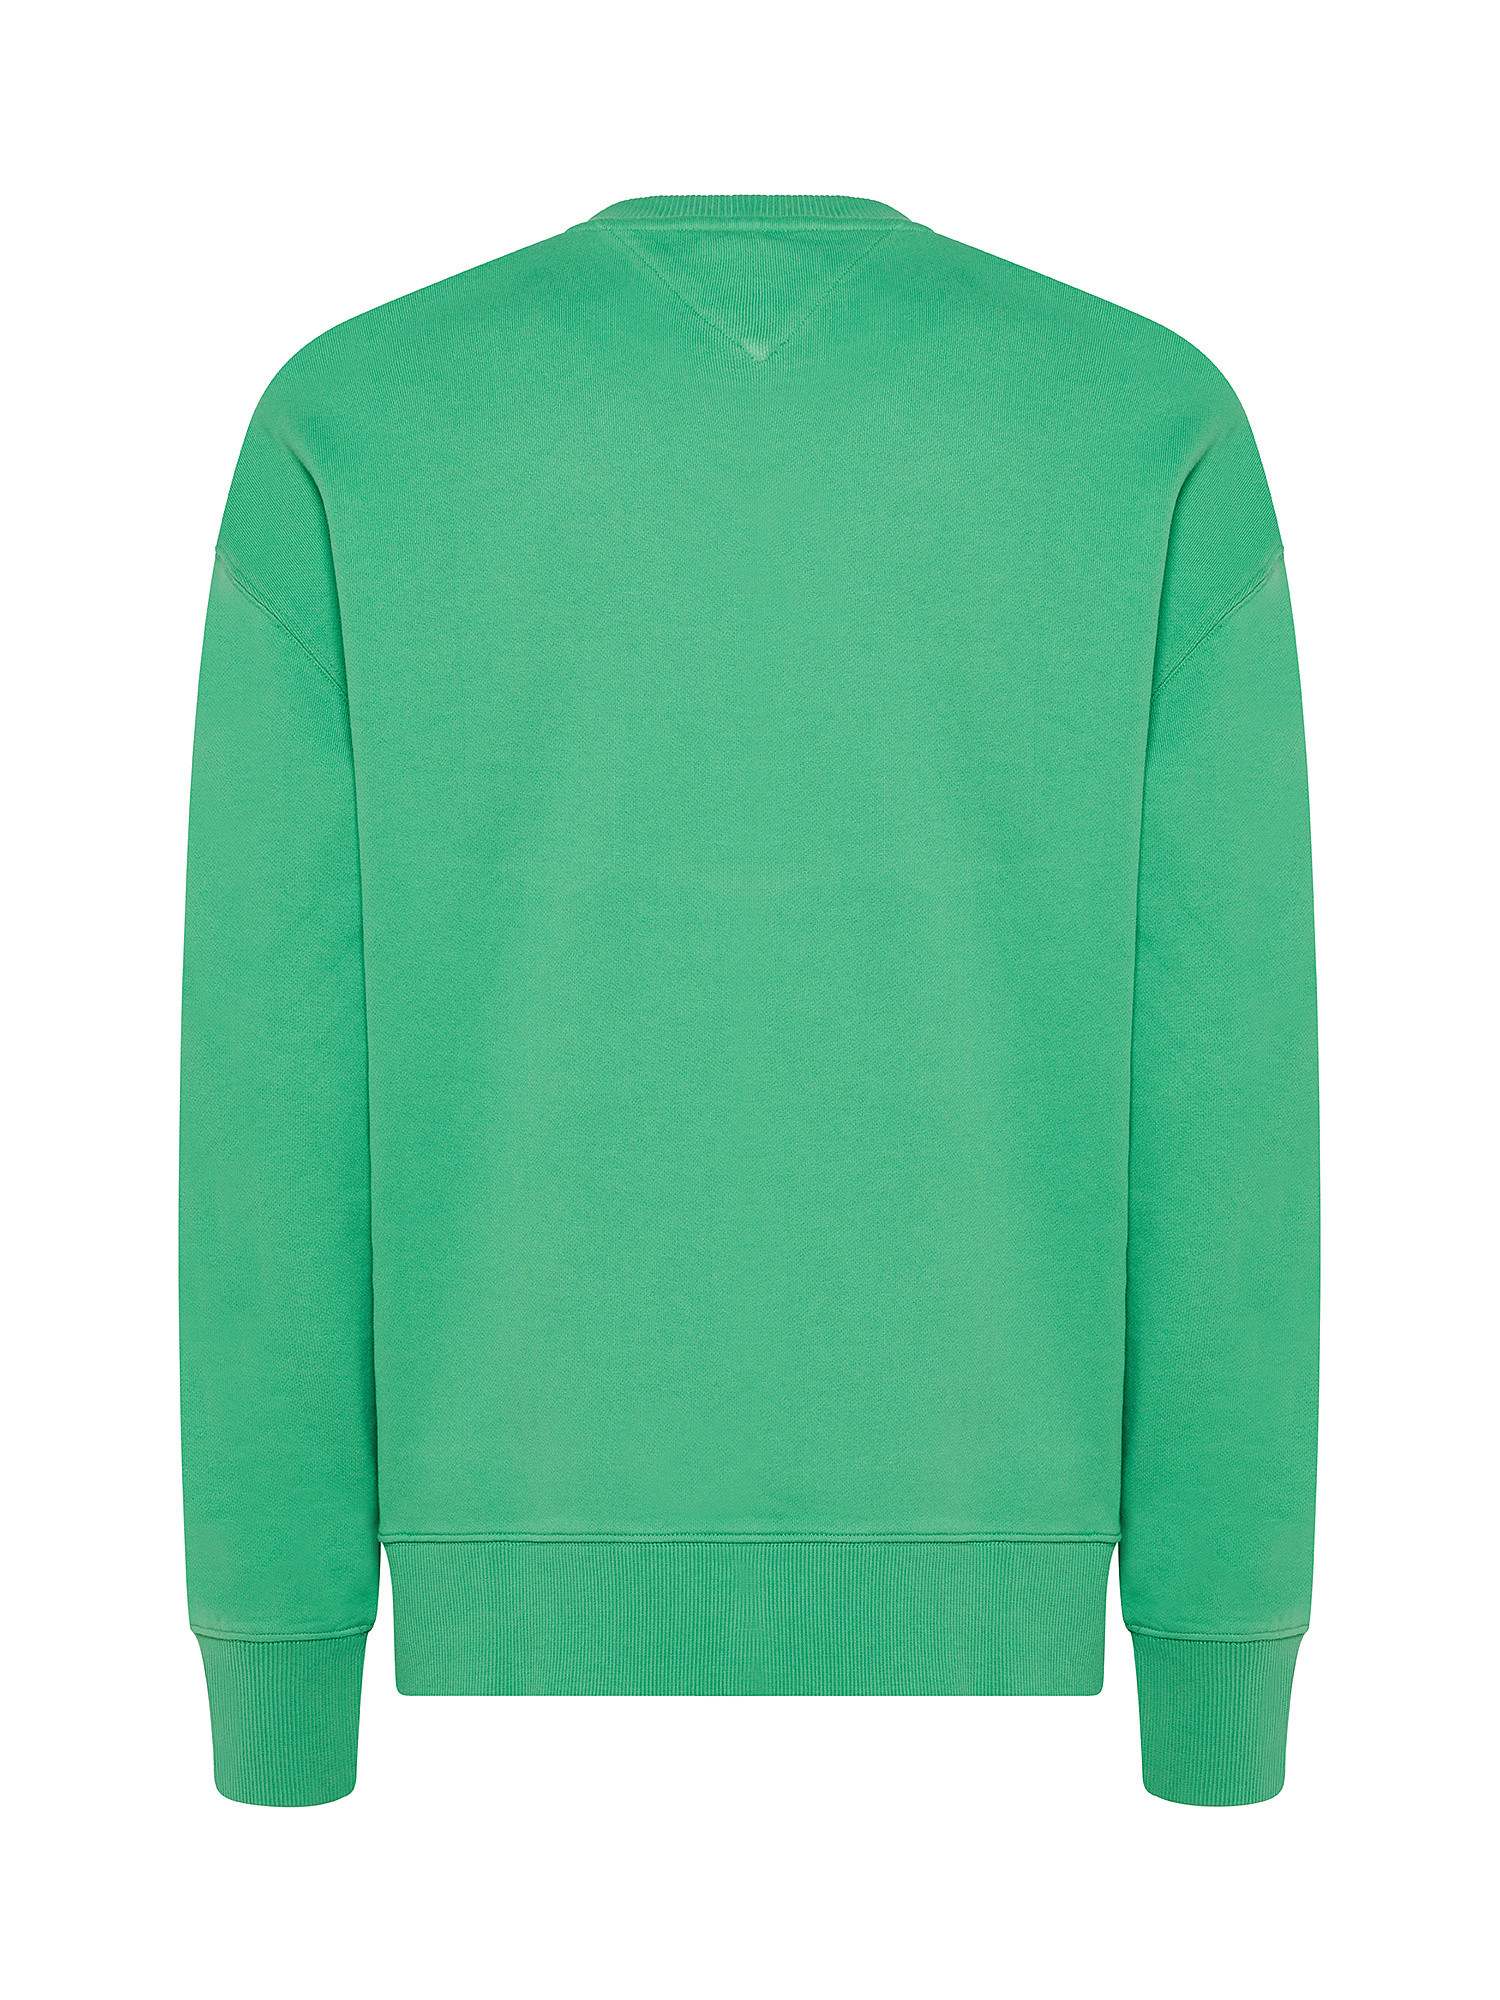 Tommy Jeans - Cotton crewneck sweatshirt with micrologo, Green, large image number 1